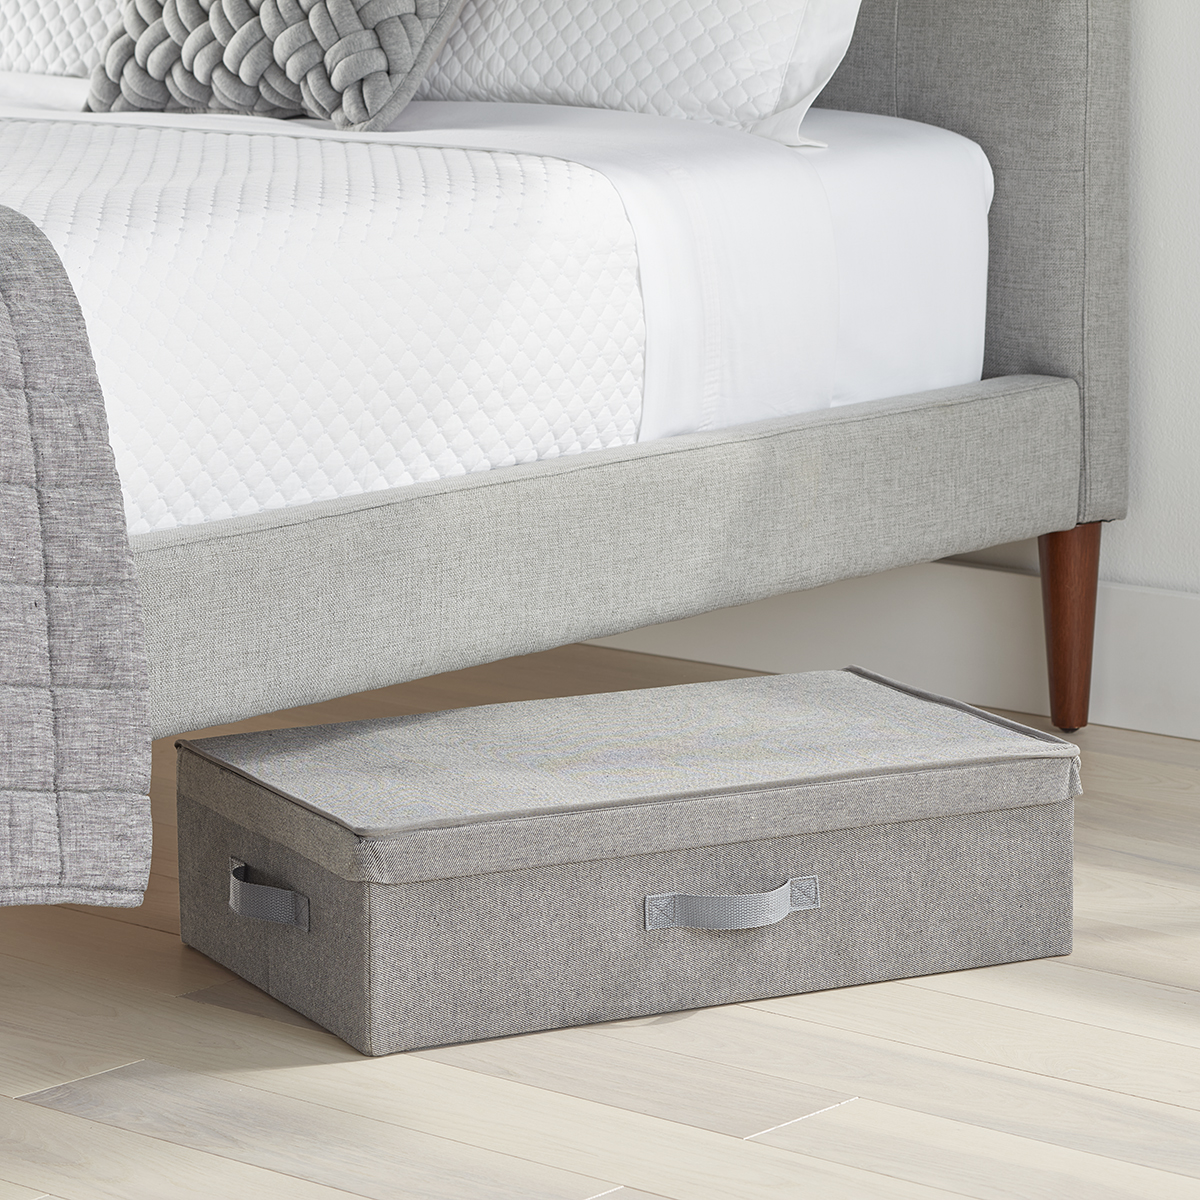 https://www.containerstore.com/catalogimages/475592/10084632_Twill_storage_underbed_box_.jpg